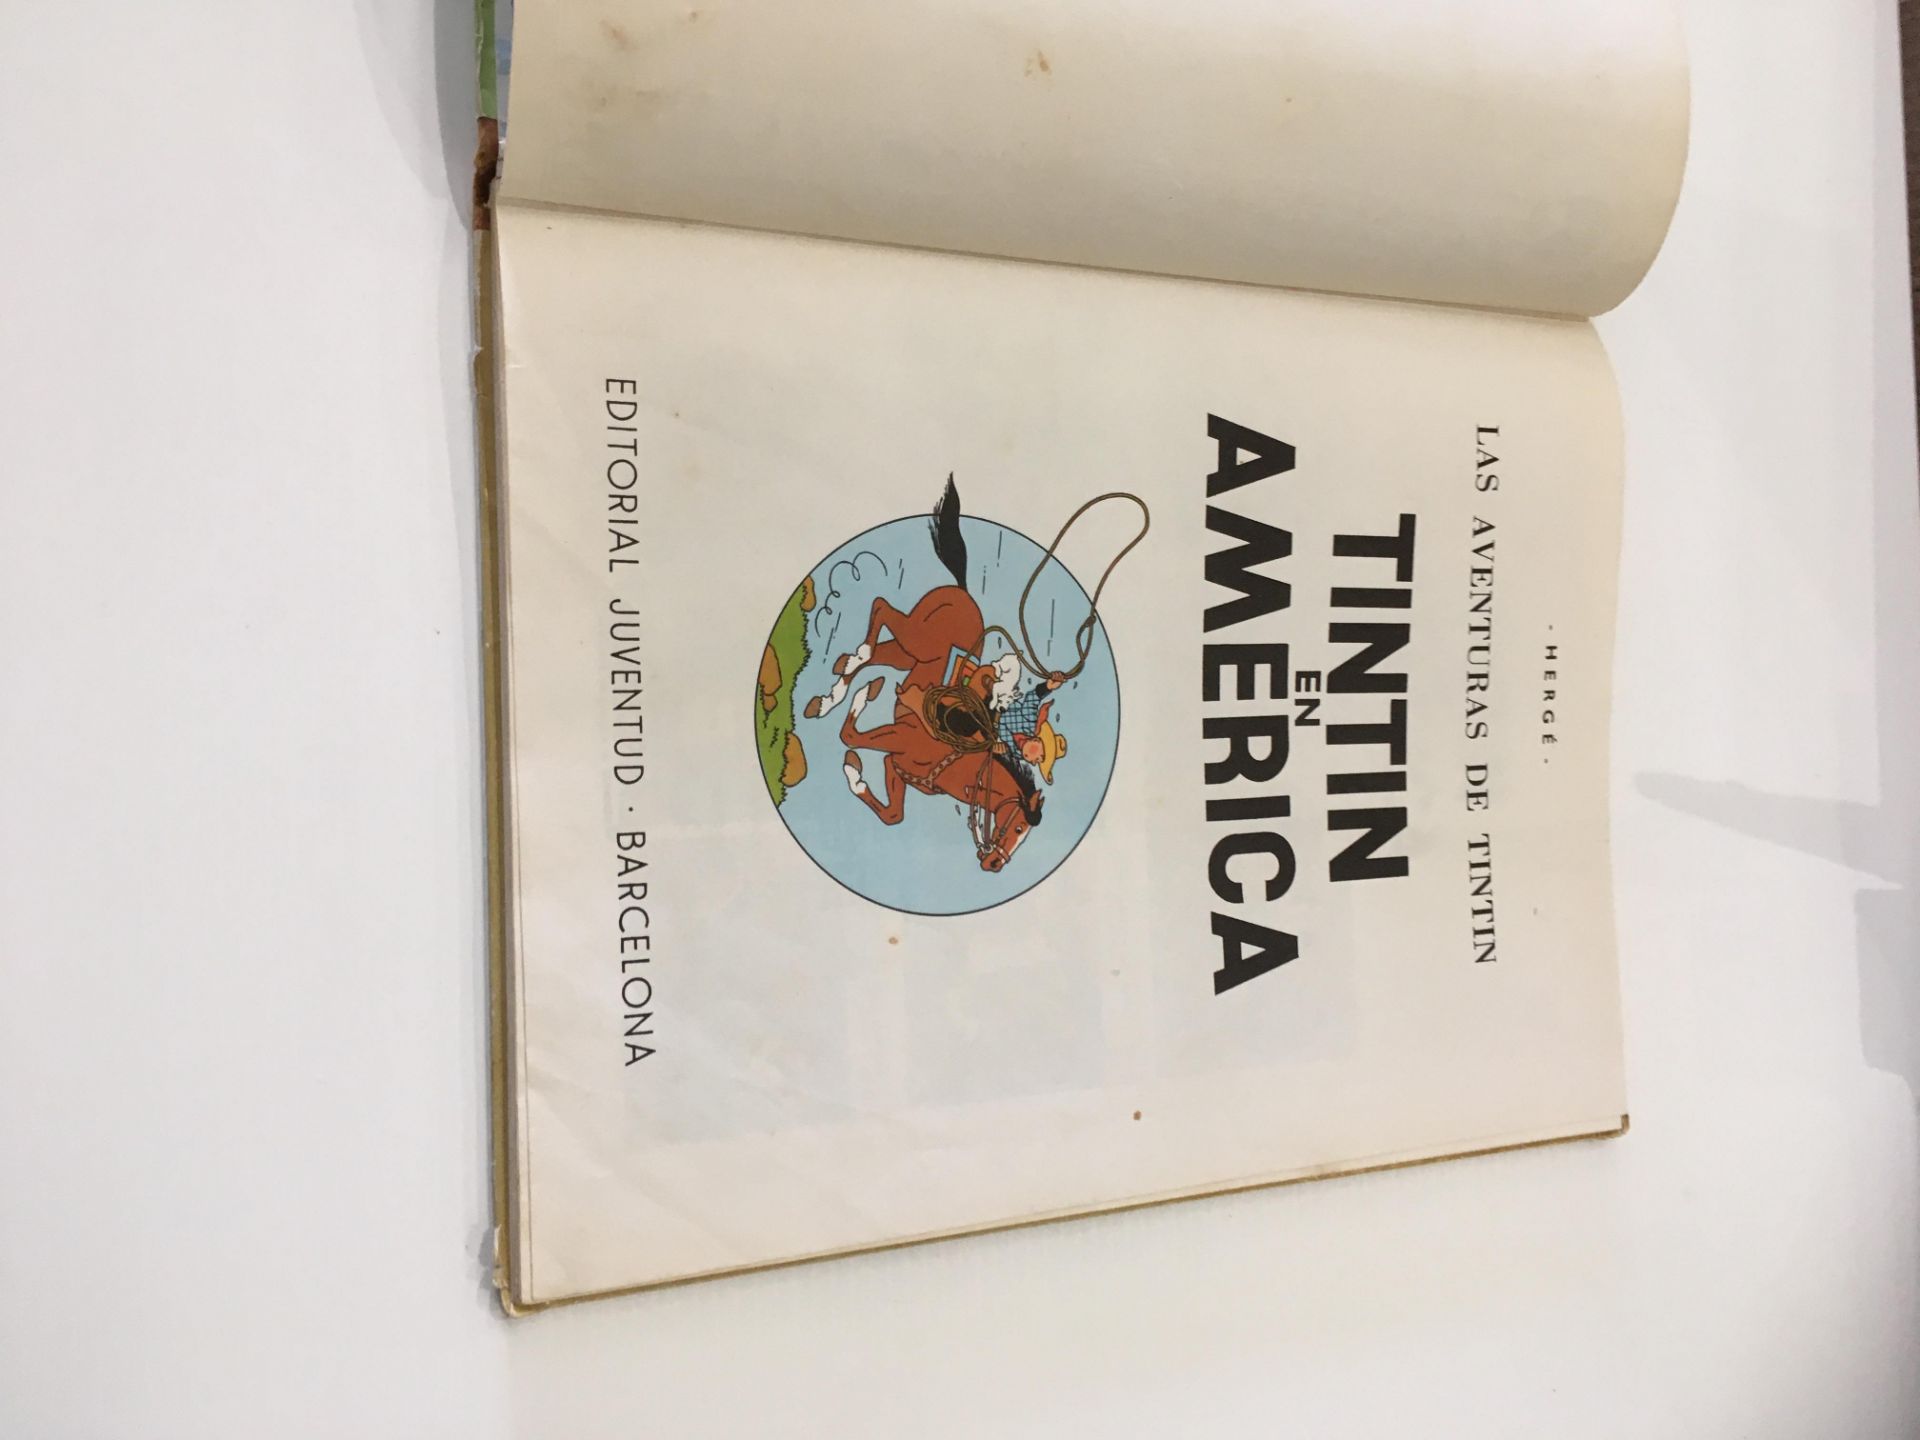 Contents to box 22 childrens books and annuals including a quantity of Herge Adventures of Tin Tin, - Image 13 of 14